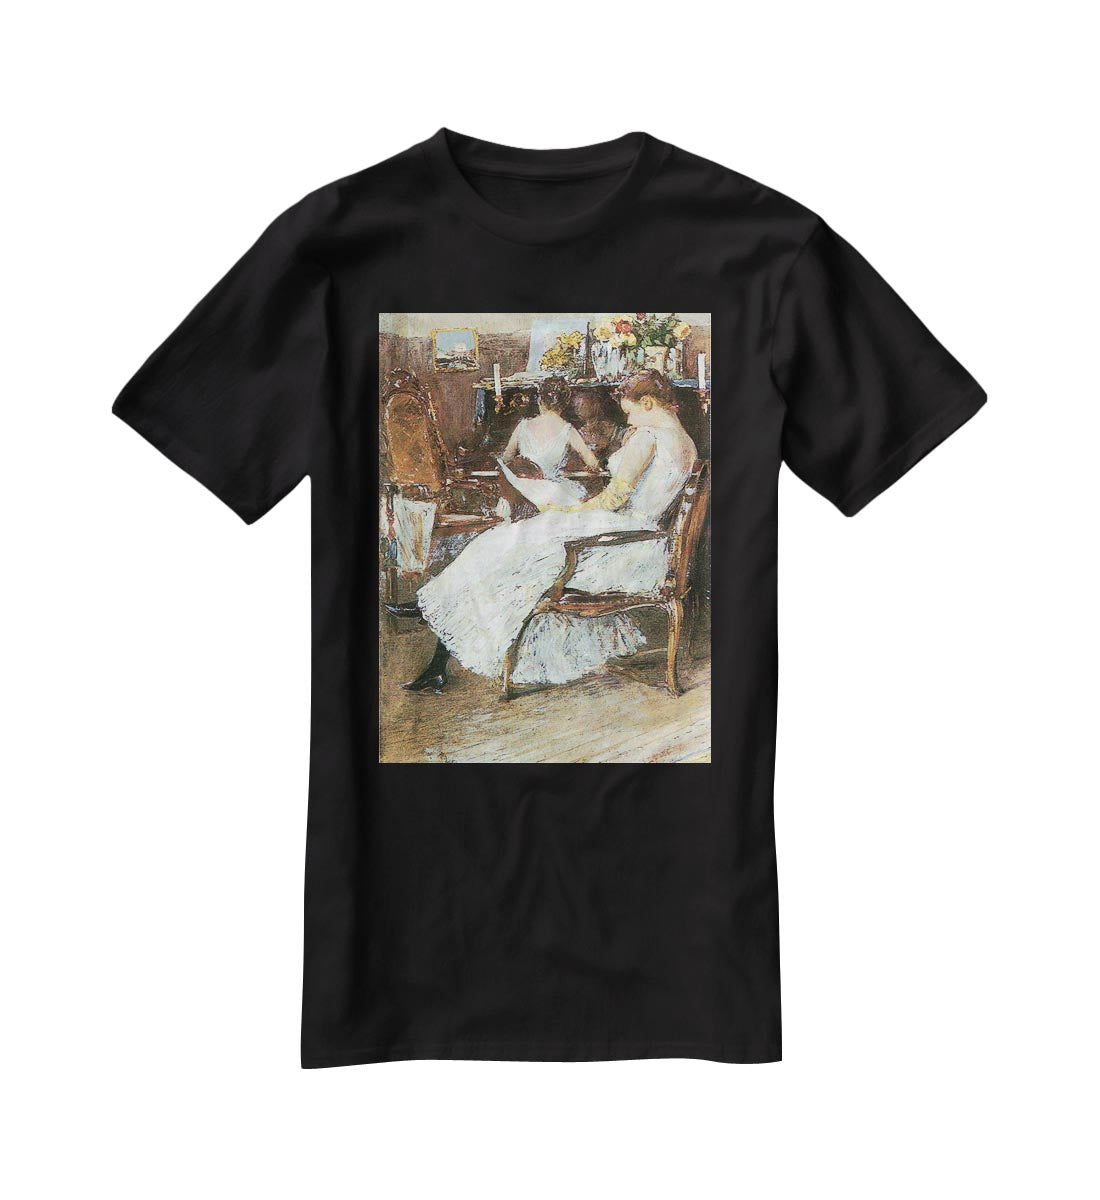 Mrs. Hassam and her sister by Hassam T-Shirt - Canvas Art Rocks - 1